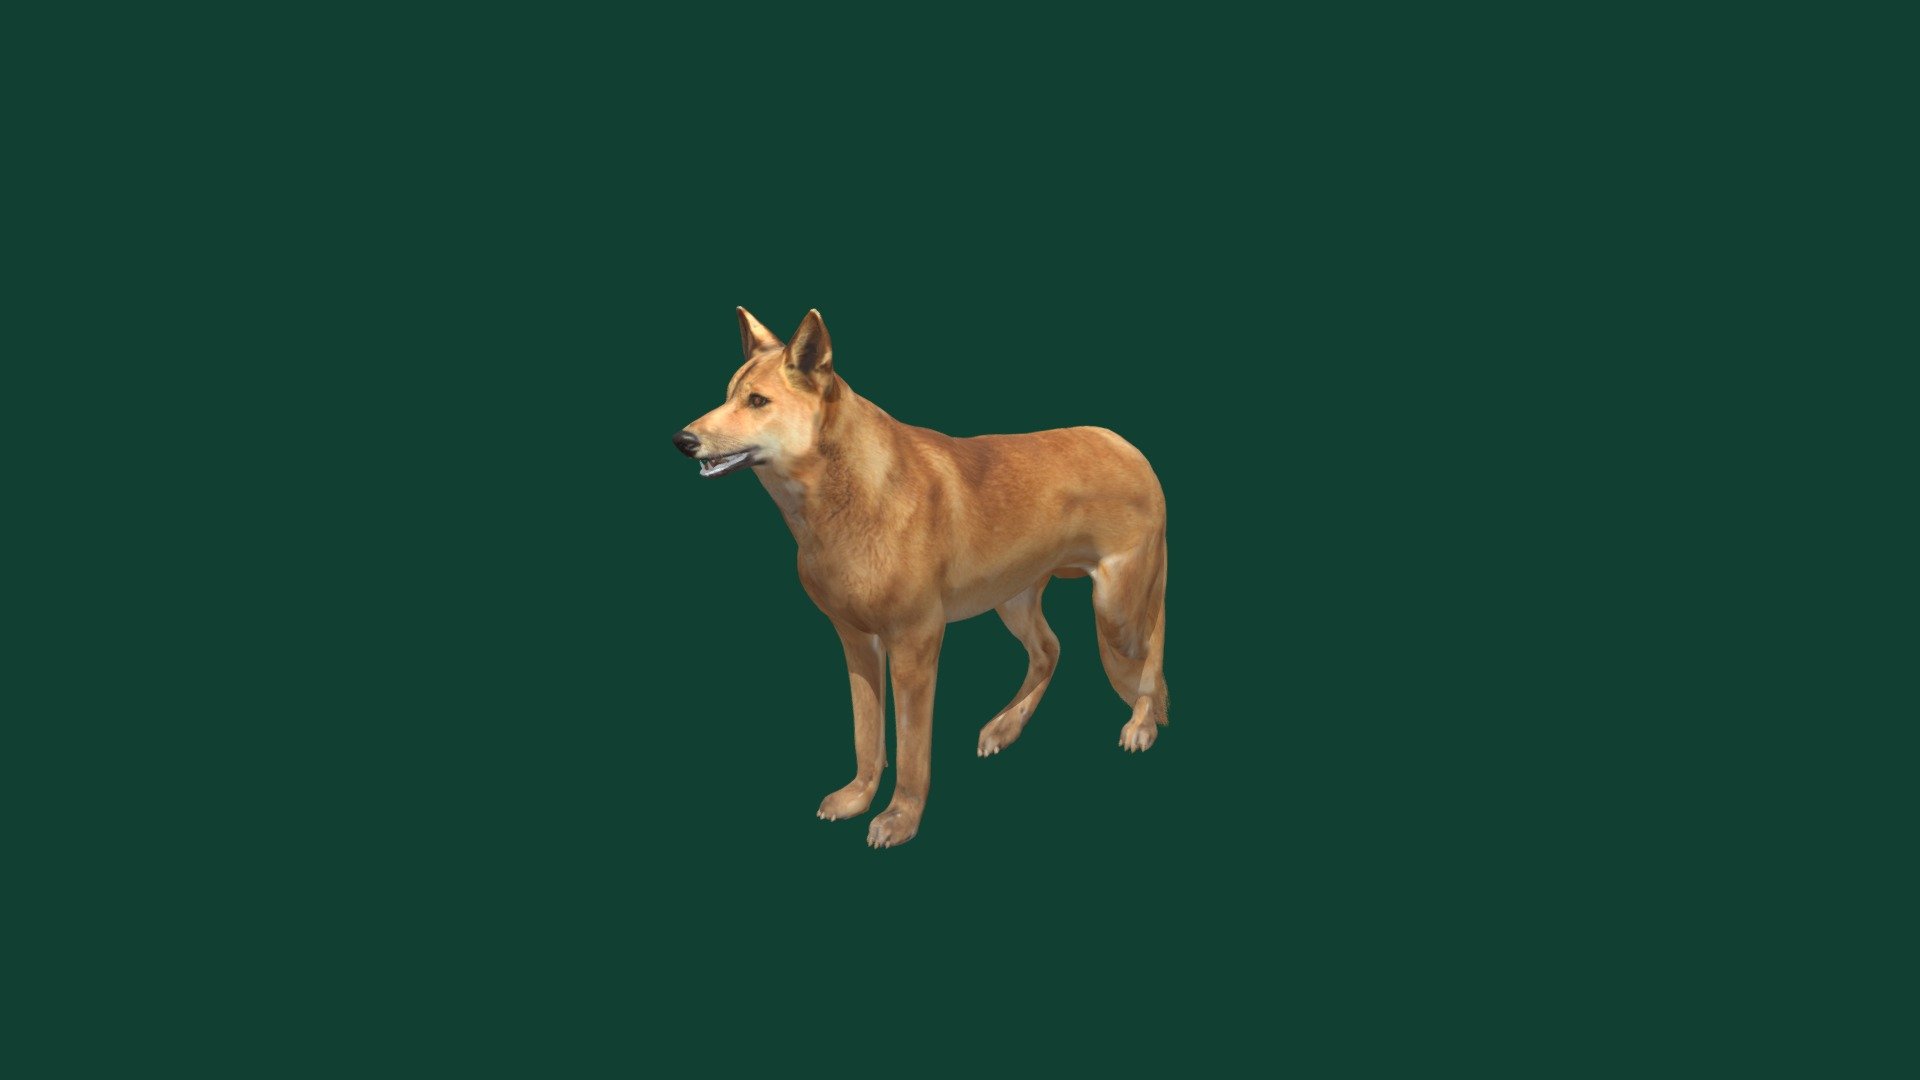 The Dingo is Australia's wild dog. It is an ancient breed of domestic dog that was introduced to Australia, probably by Asian seafarers, about 4,000 years ago. Its origins have been traced back to early breeds of domestic dogs in south east Asia (Jackson et al. 2017) 3d model